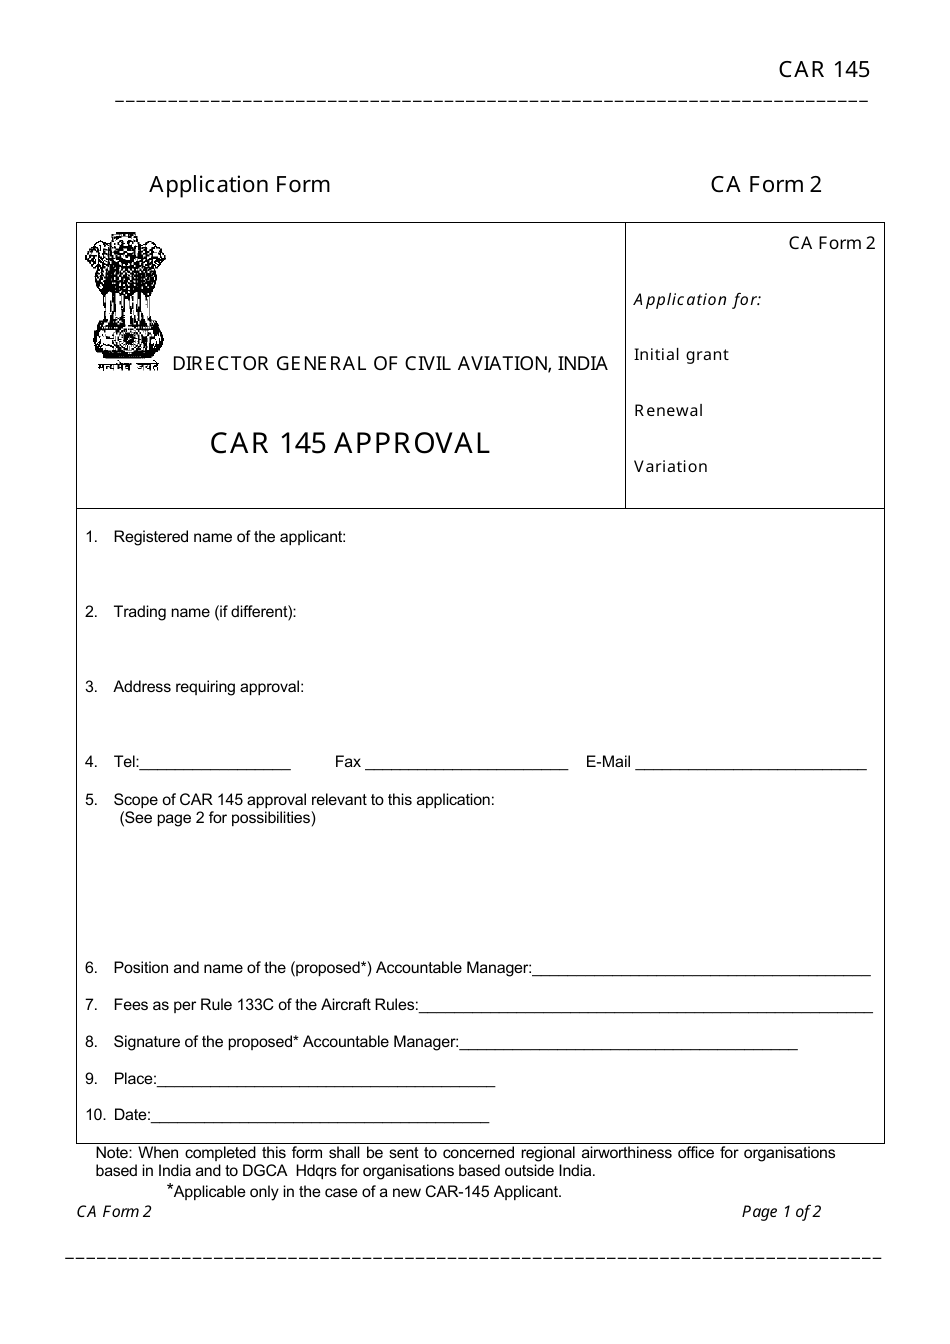 CA Form 2 Car 145 Approval Application Form - India, Page 1